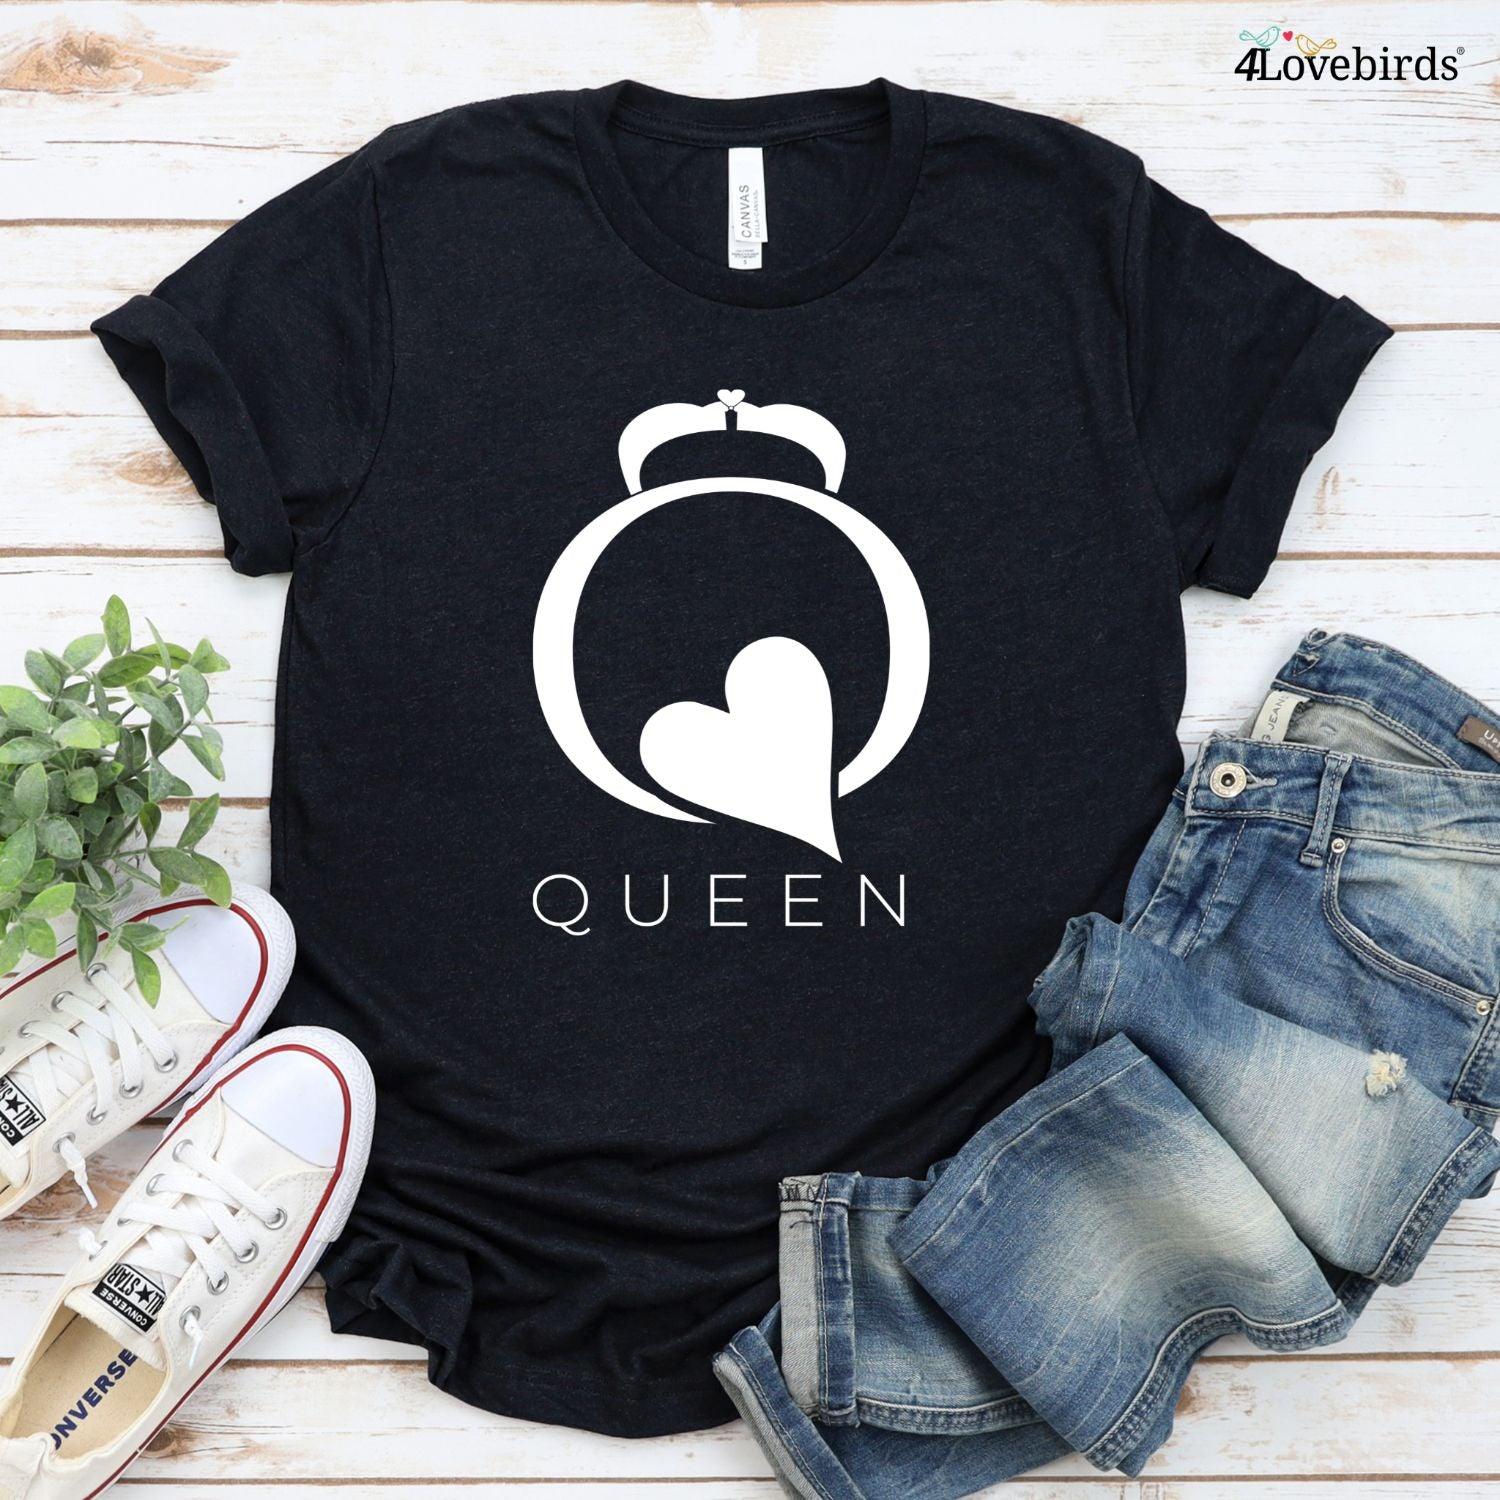 King Queen Hoodies, King Queen Set, Couples Matching, Couples Hoodie,  Matching Hoodie, Couple Hoodies, Gift for Couple, Couple Gift -  Norway